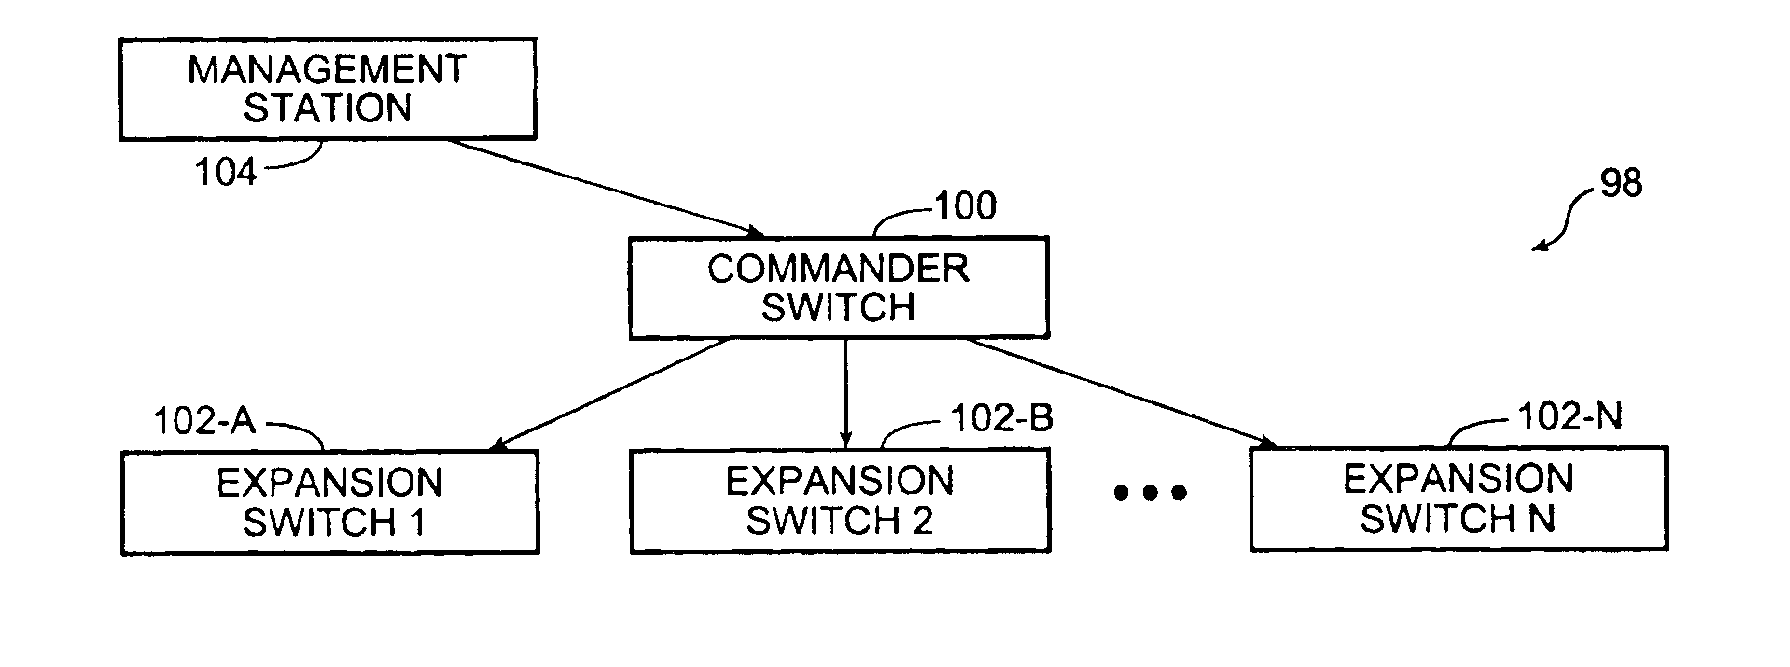 HTTP redirection of configuration data for network devices